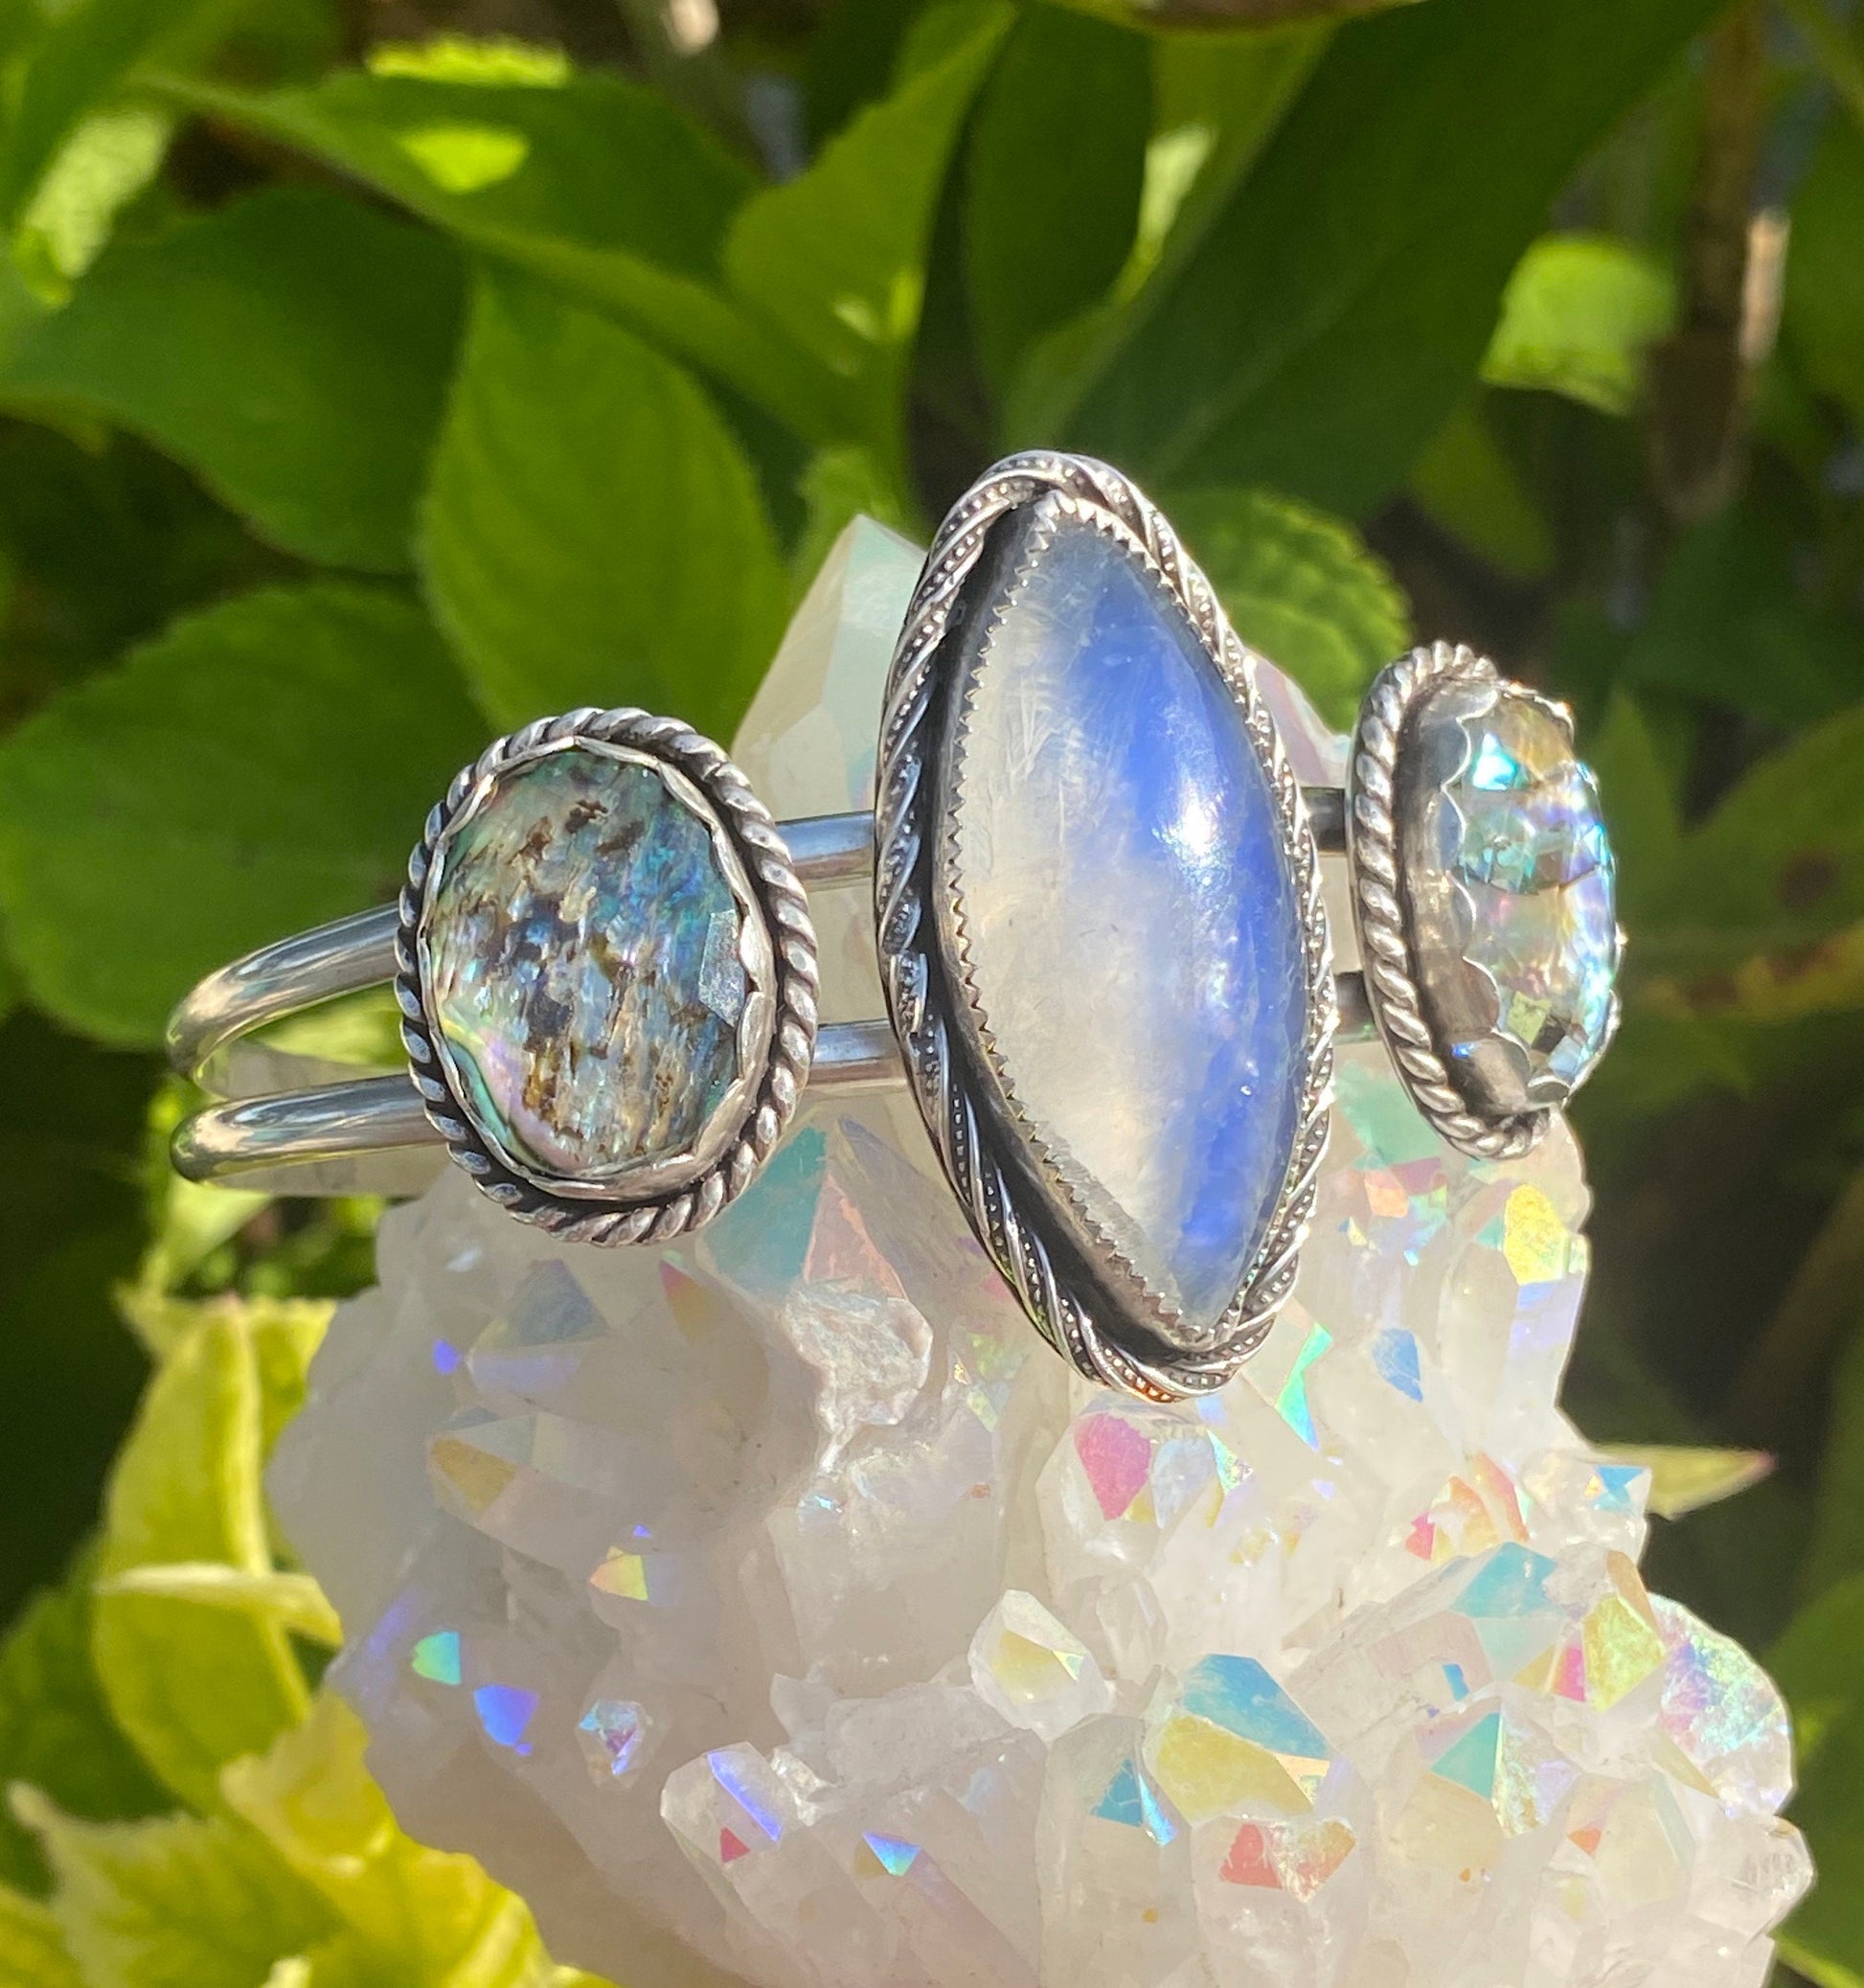 Moonstone and – //Once Cuff thebohemianfairie Abalone/Quartz Upon a Doublet Collecti Dream